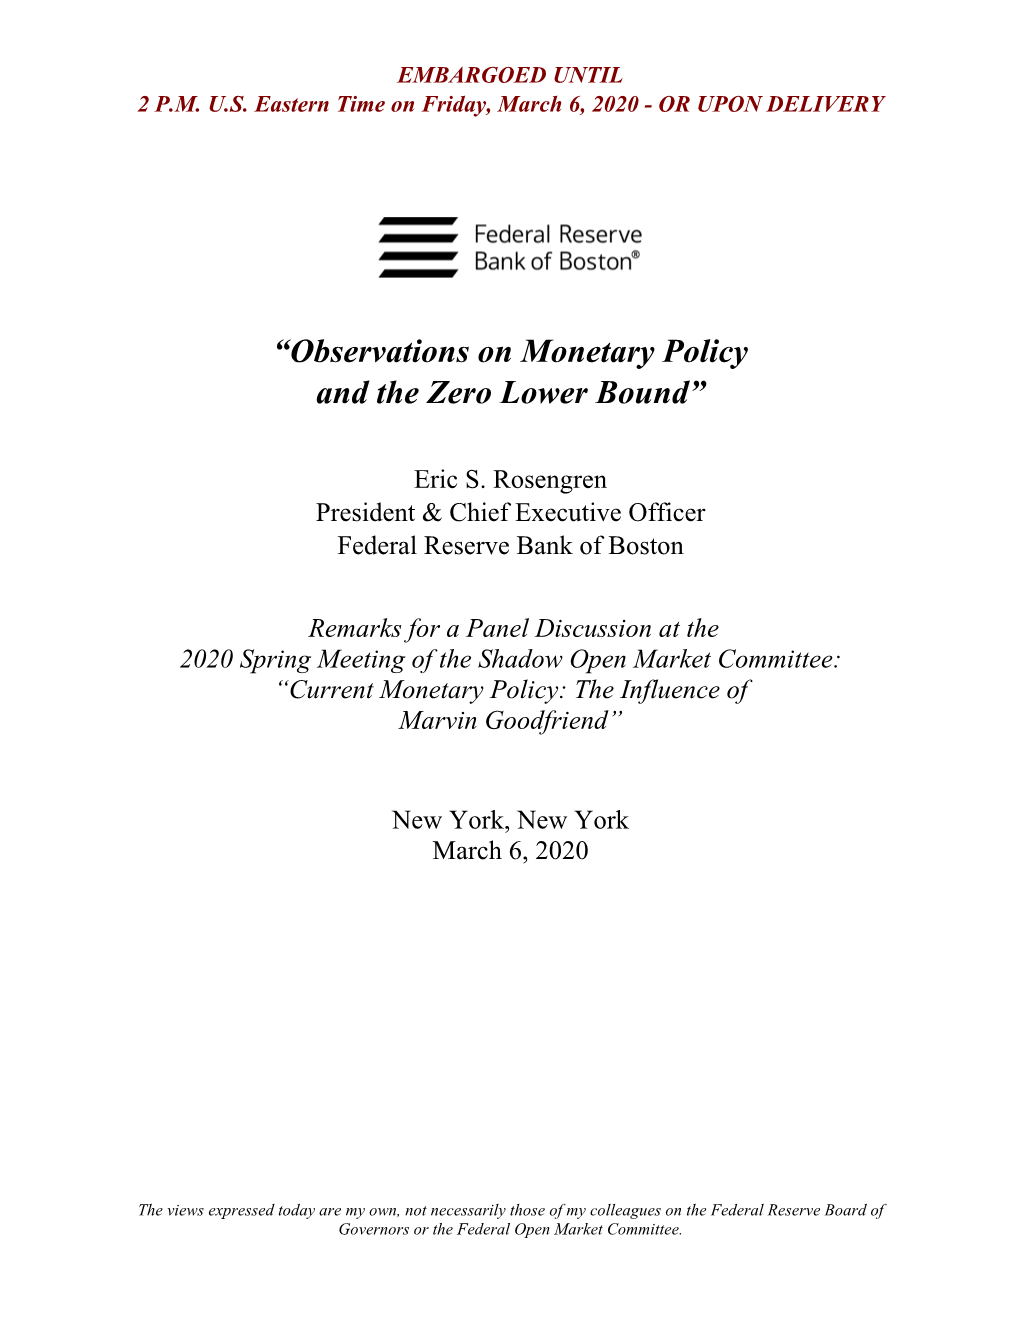 “Observations on Monetary Policy and the Zero Lower Bound”